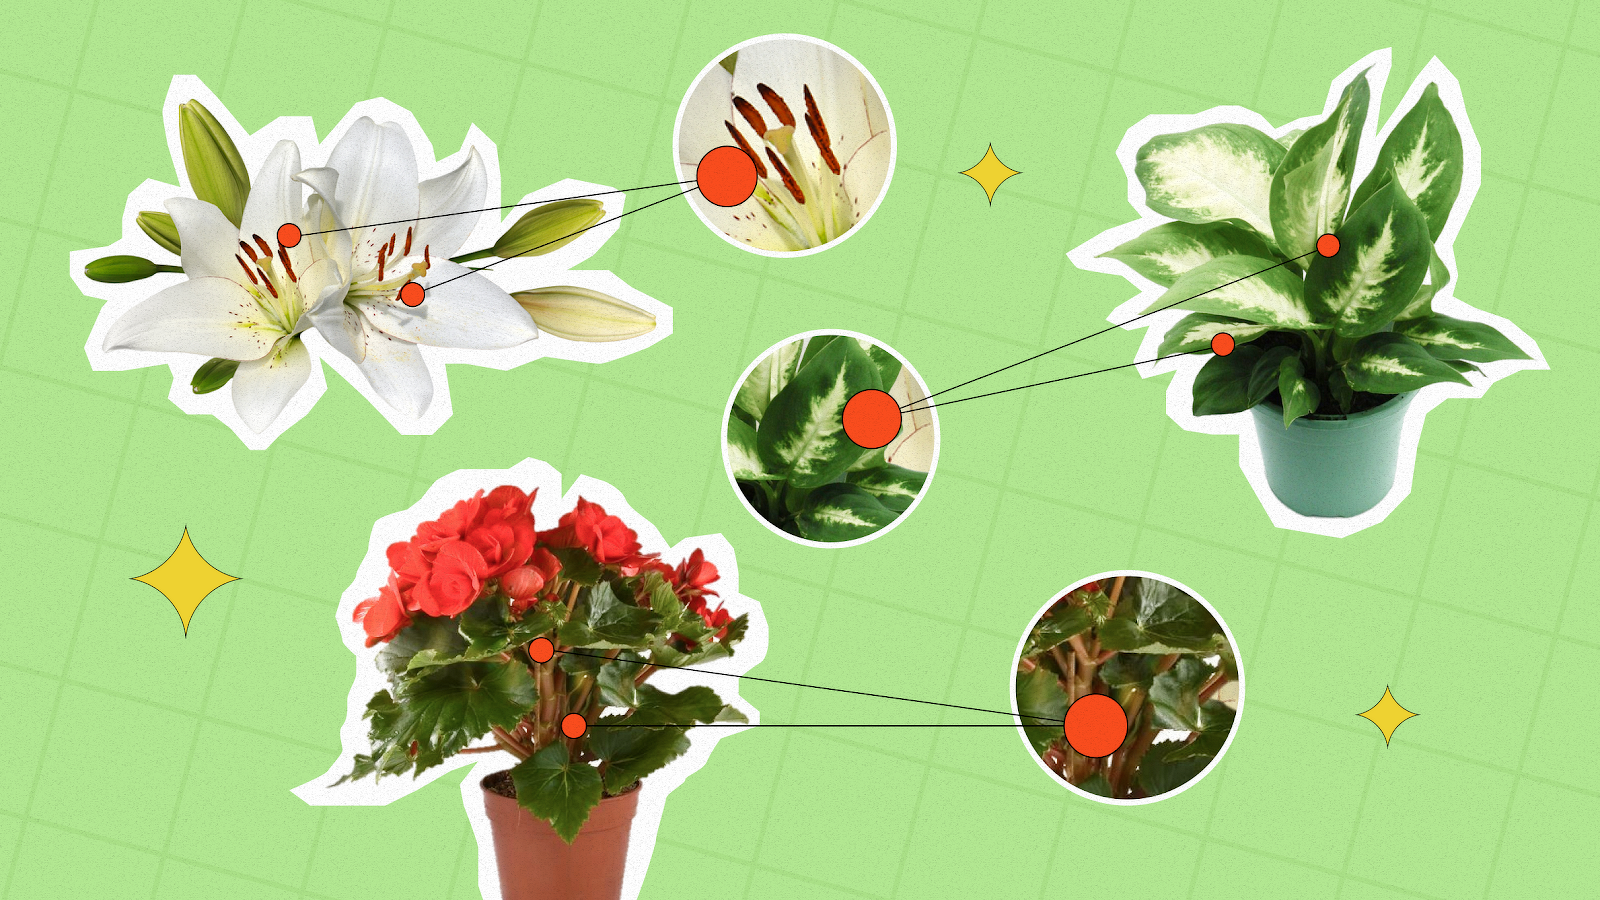 What Parts of Flowers and Plants Are Most Poisonous